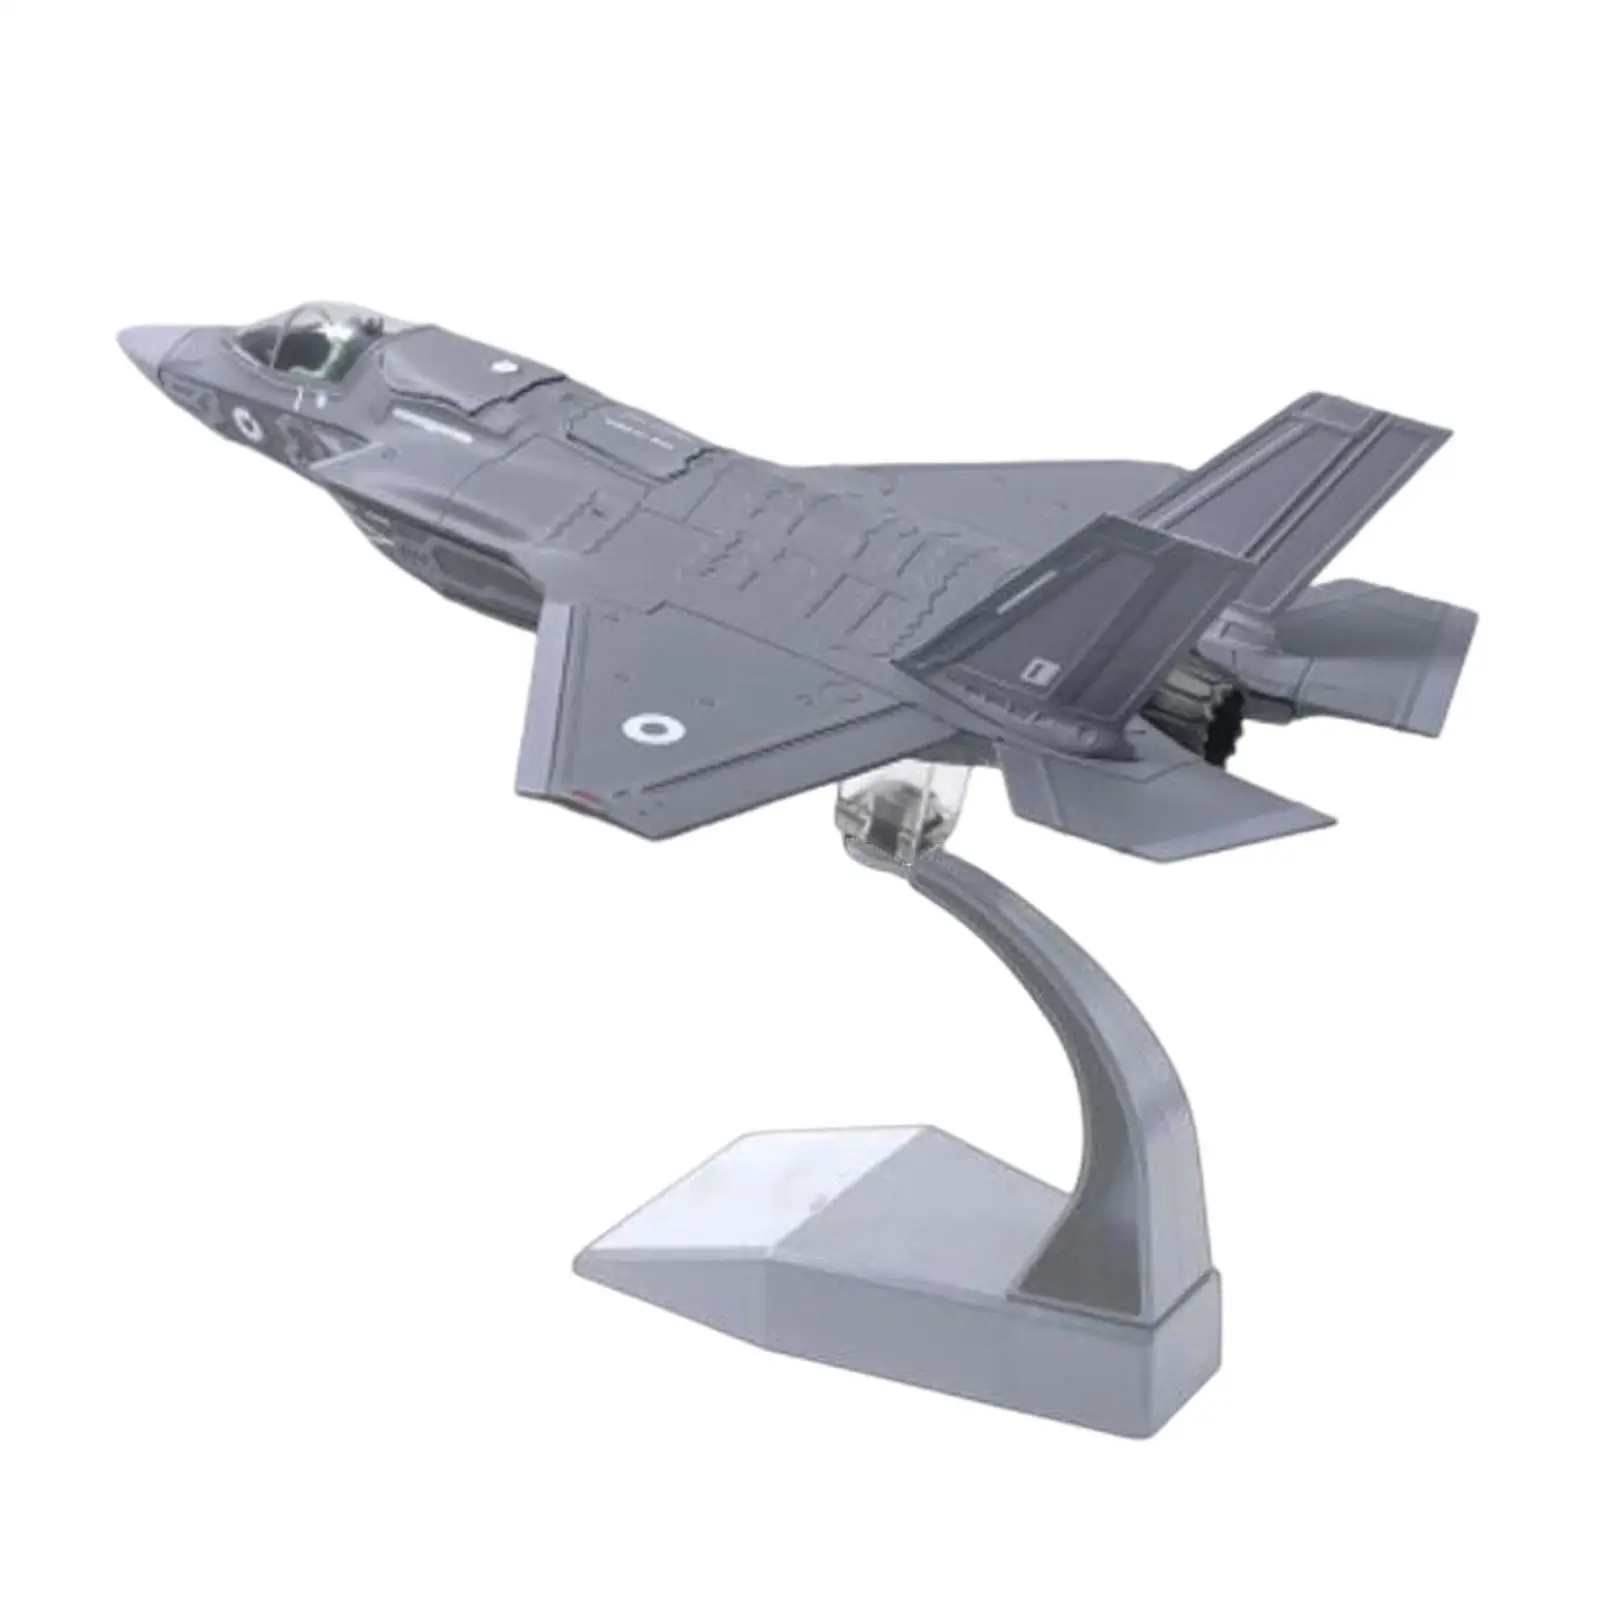 1:72 Scale F35 Metal  Diecast Warplane with Display Stand Hobby Fighter Toy Collection Ornament